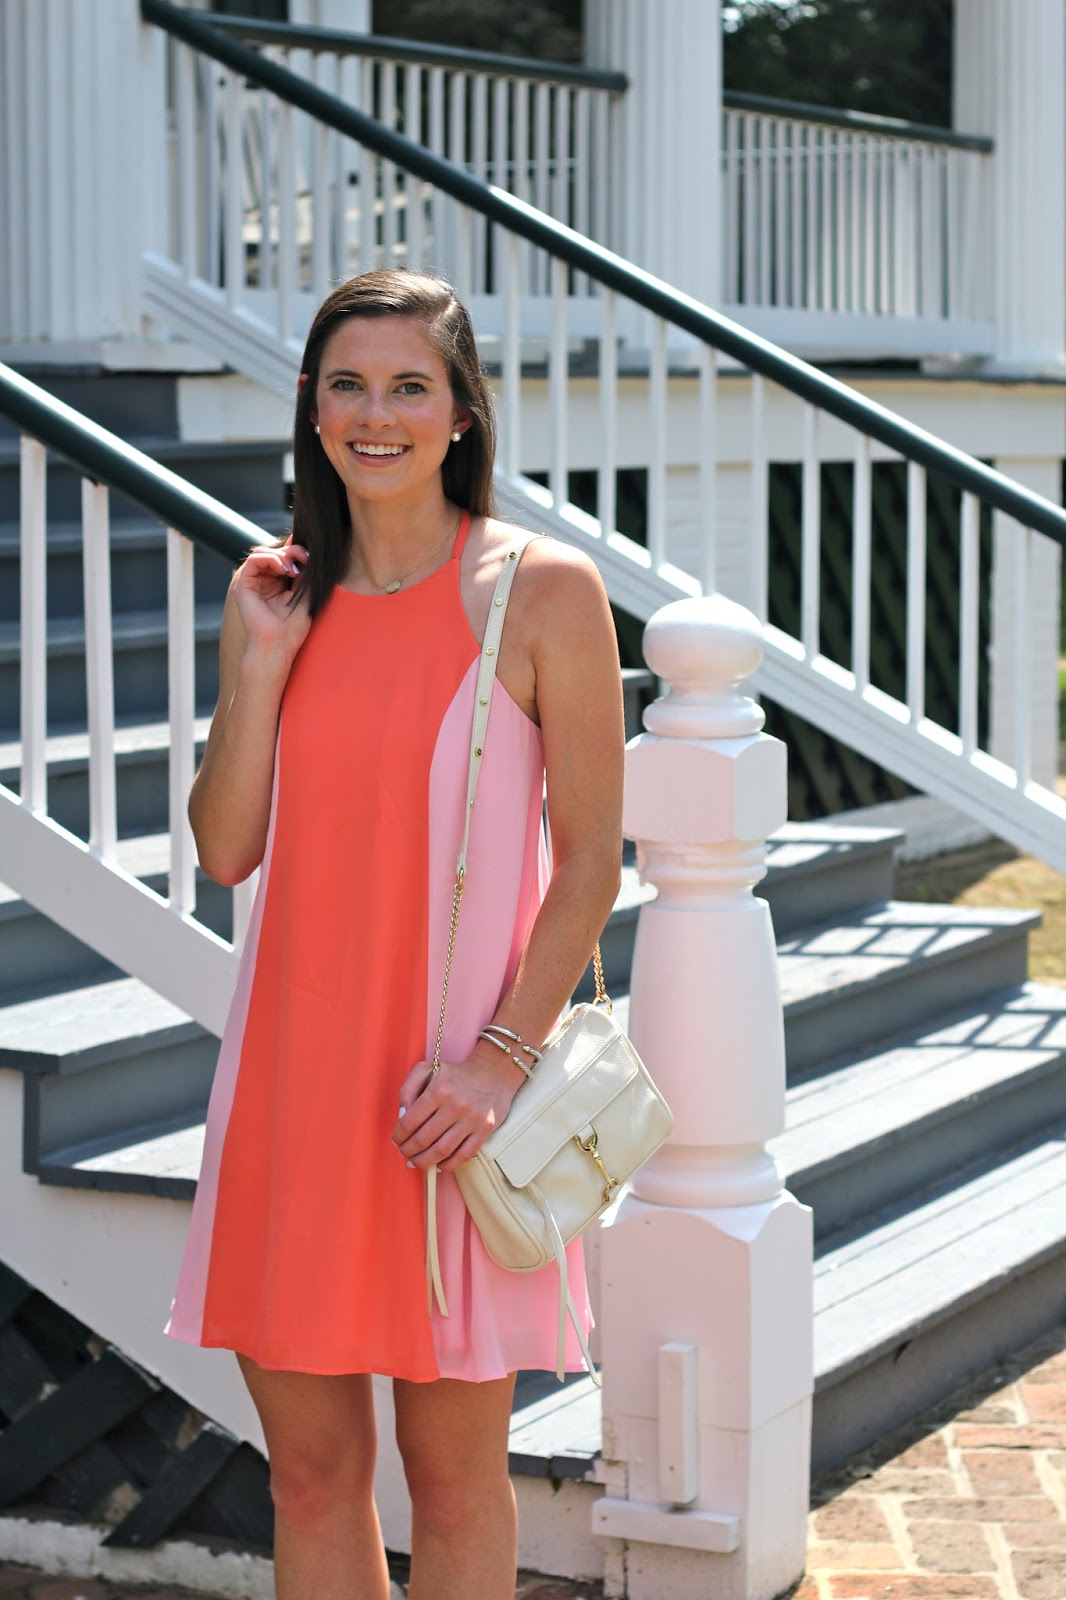 Prep In Your Step: Wedding Wear with CROSBY by Mollie Burch